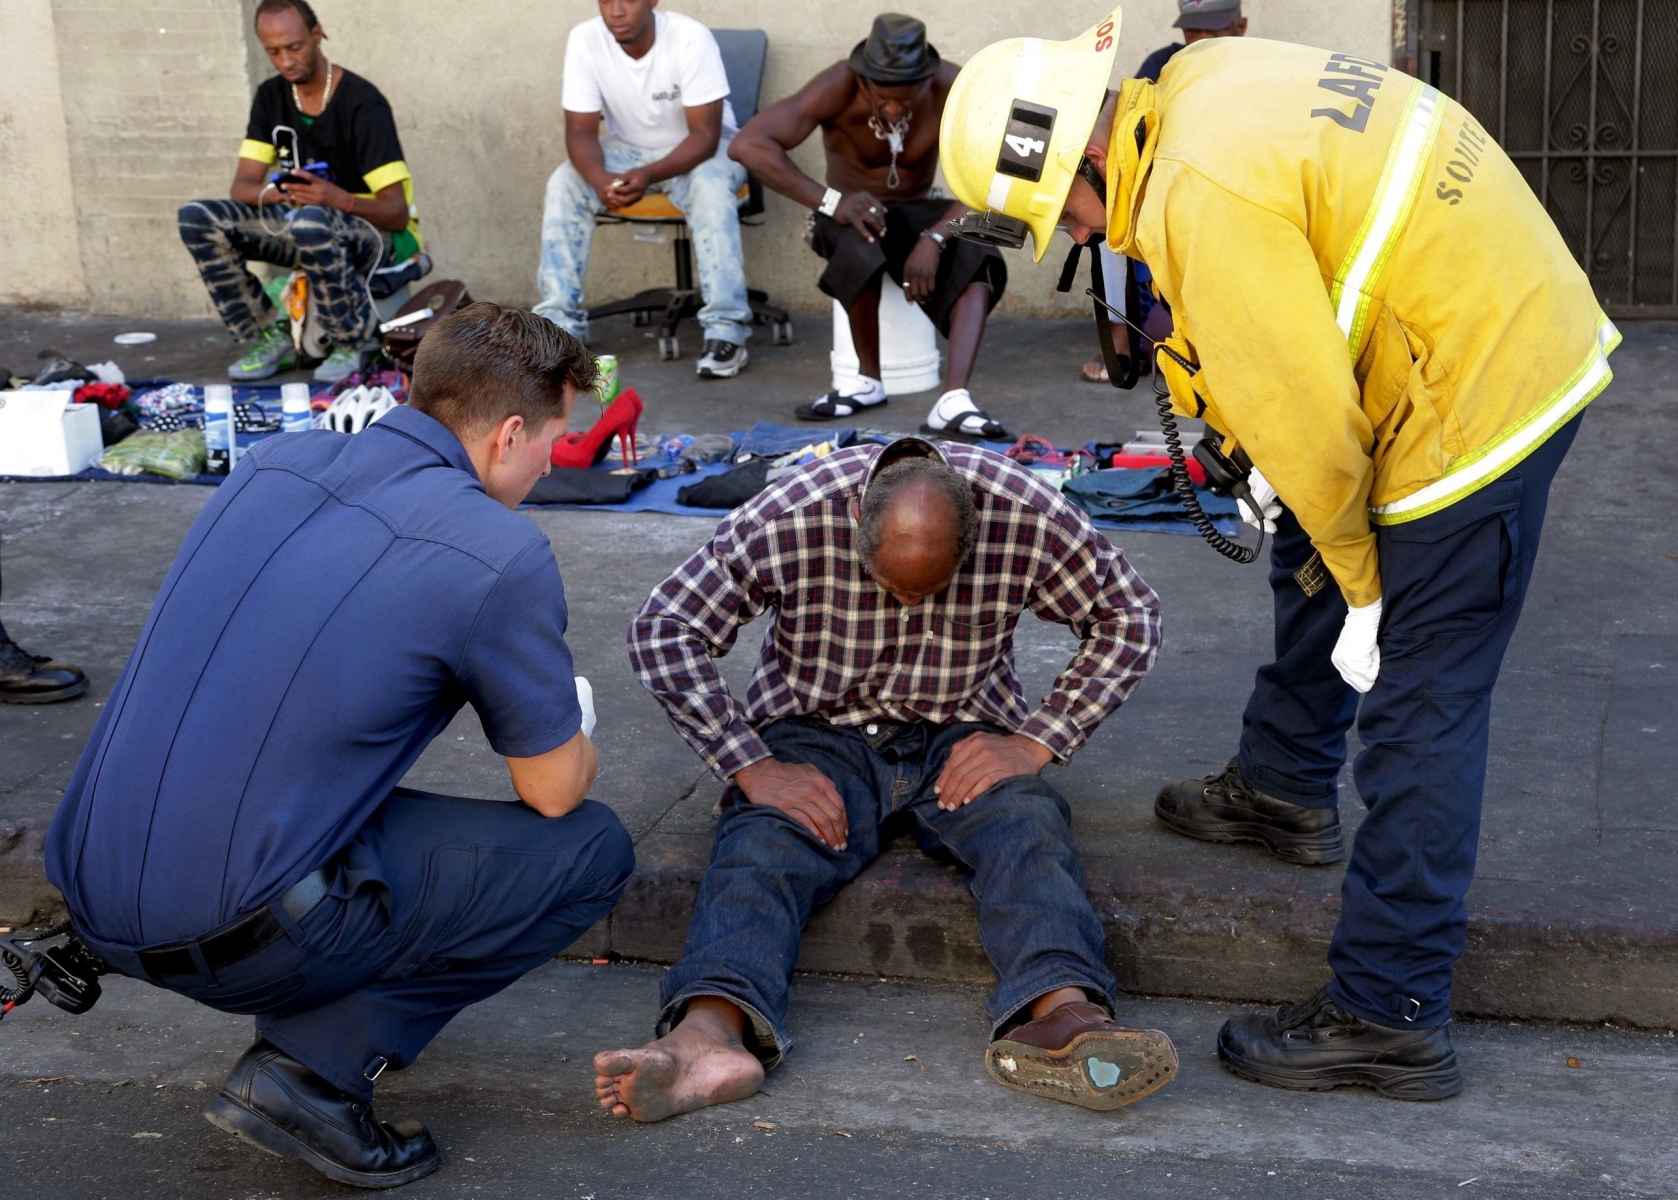 Los Angeles paramedics and firefighters evaluate a person who fell ill in the Skid Row section of Los Angeles, Friday, Aug. 19, 2016. Fire Department officials say paramedics responded to the area on Friday afternoon and took over a dozen people to hospitals from the downtown area where the homeless gather. Officials have not yet determined what may have caused the sicknesses. (AP Photo/Nick Ut) APTOPIX Homeless Illnesses